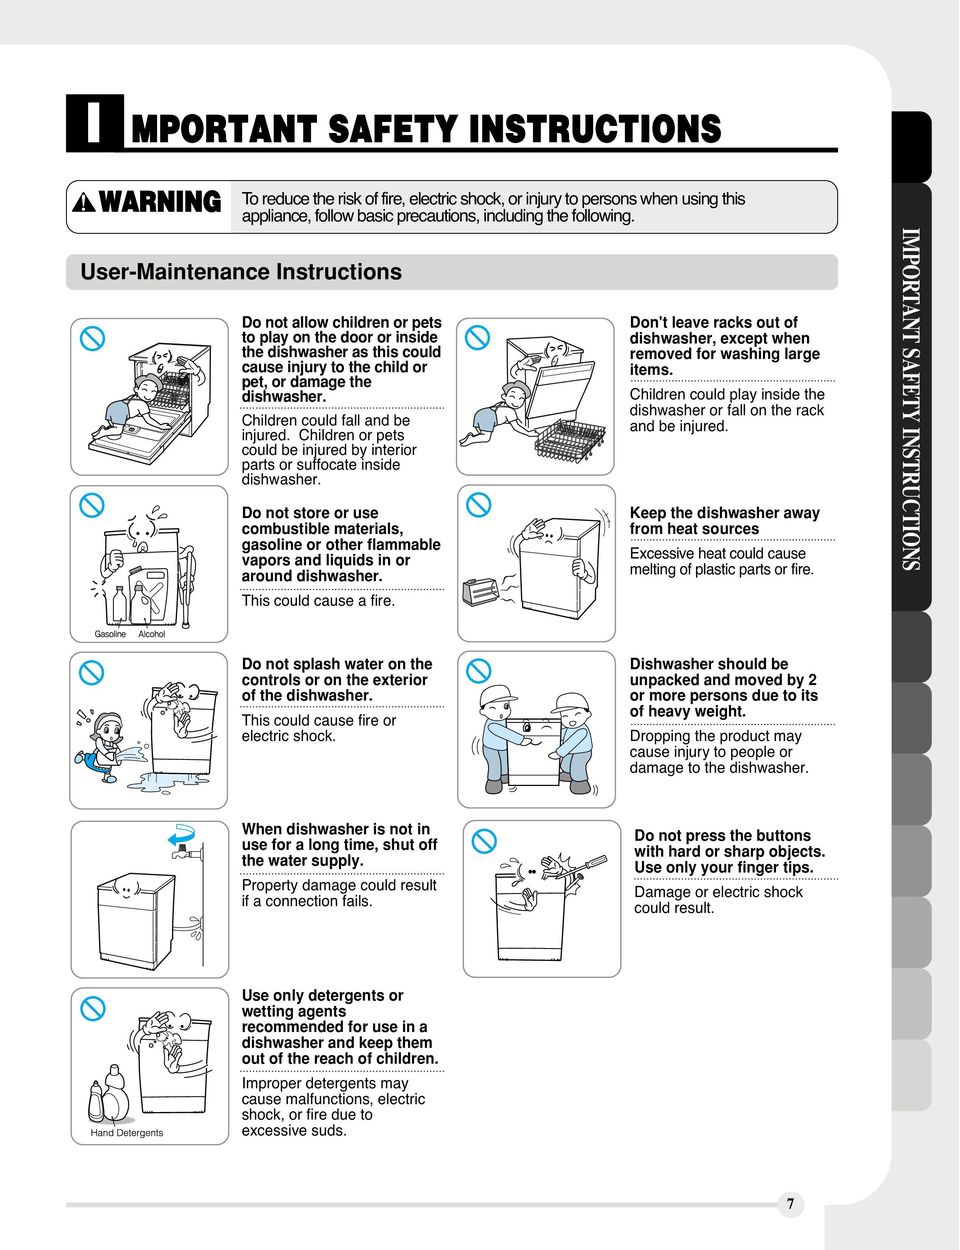 Children could fall and be injured. Children or pets could be injured by interior parts or suffocate inside dishwasher.